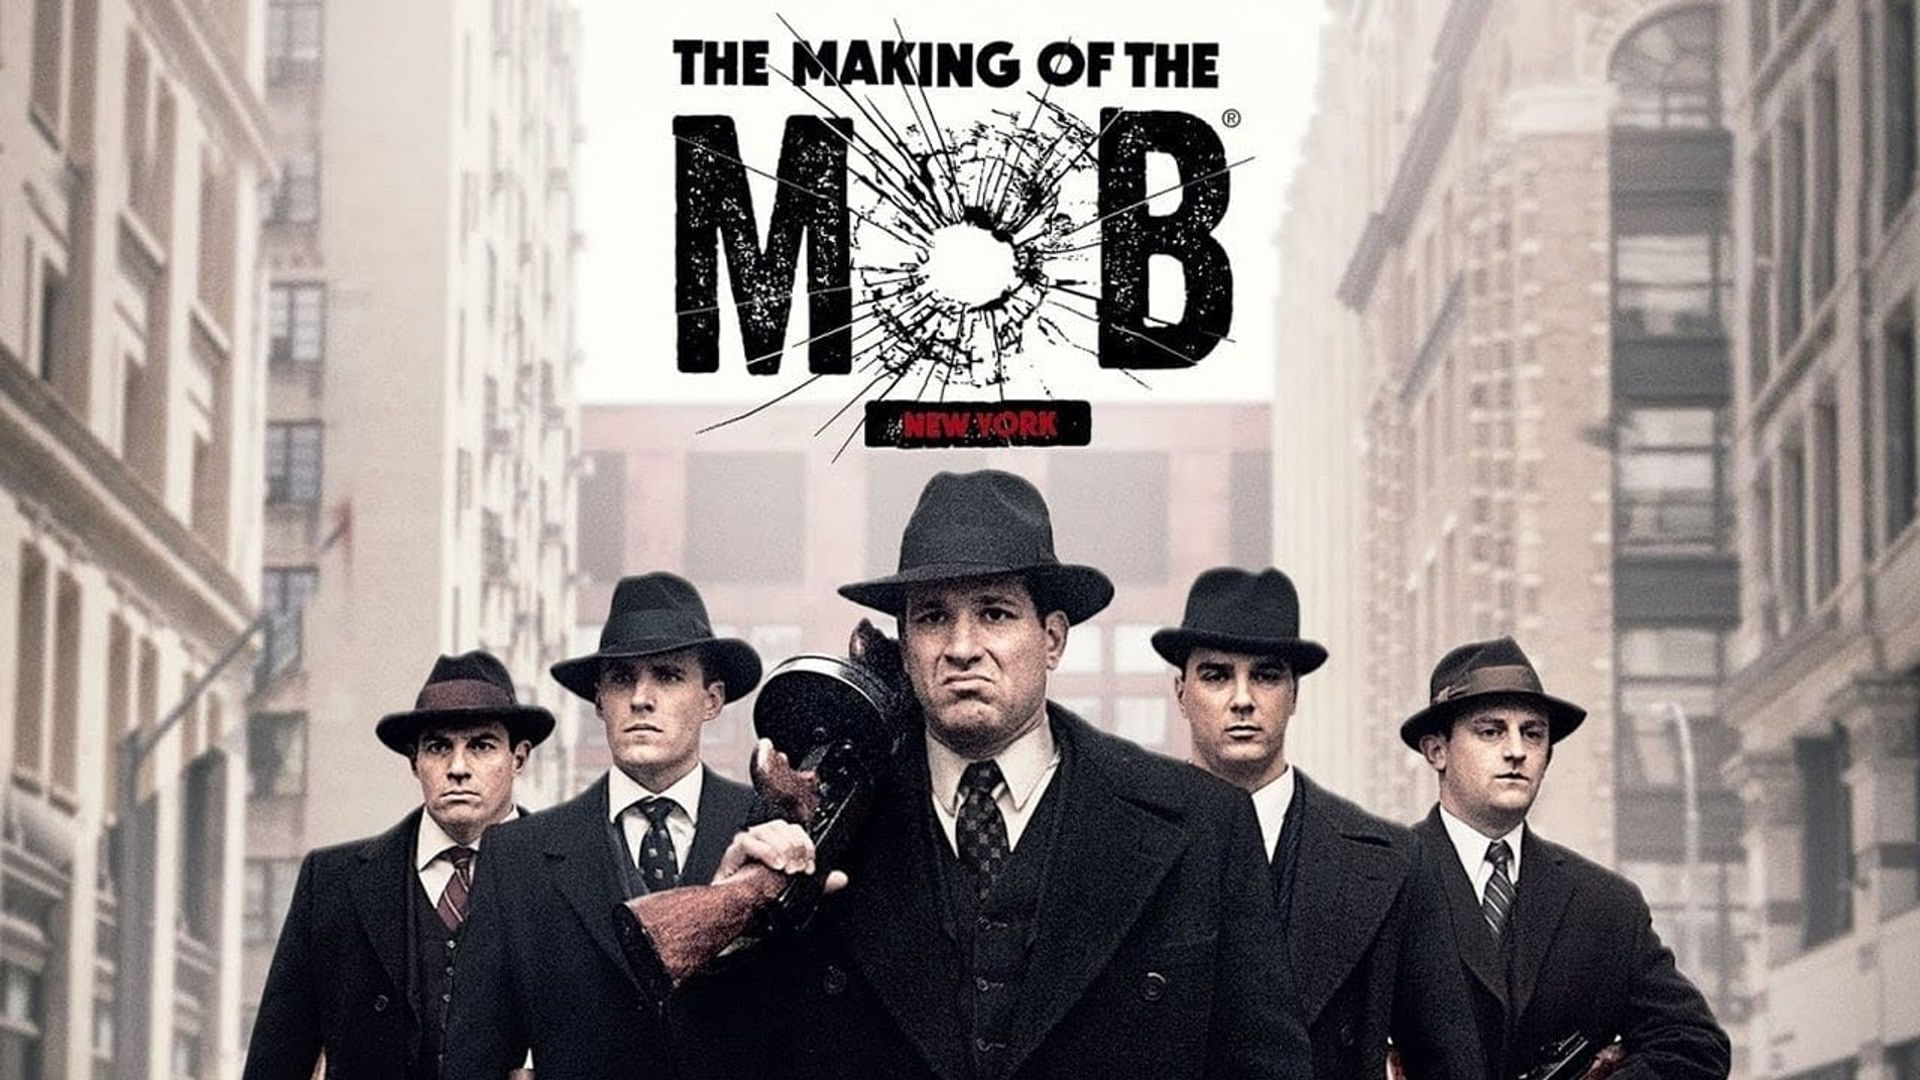 The Making of the Mob background